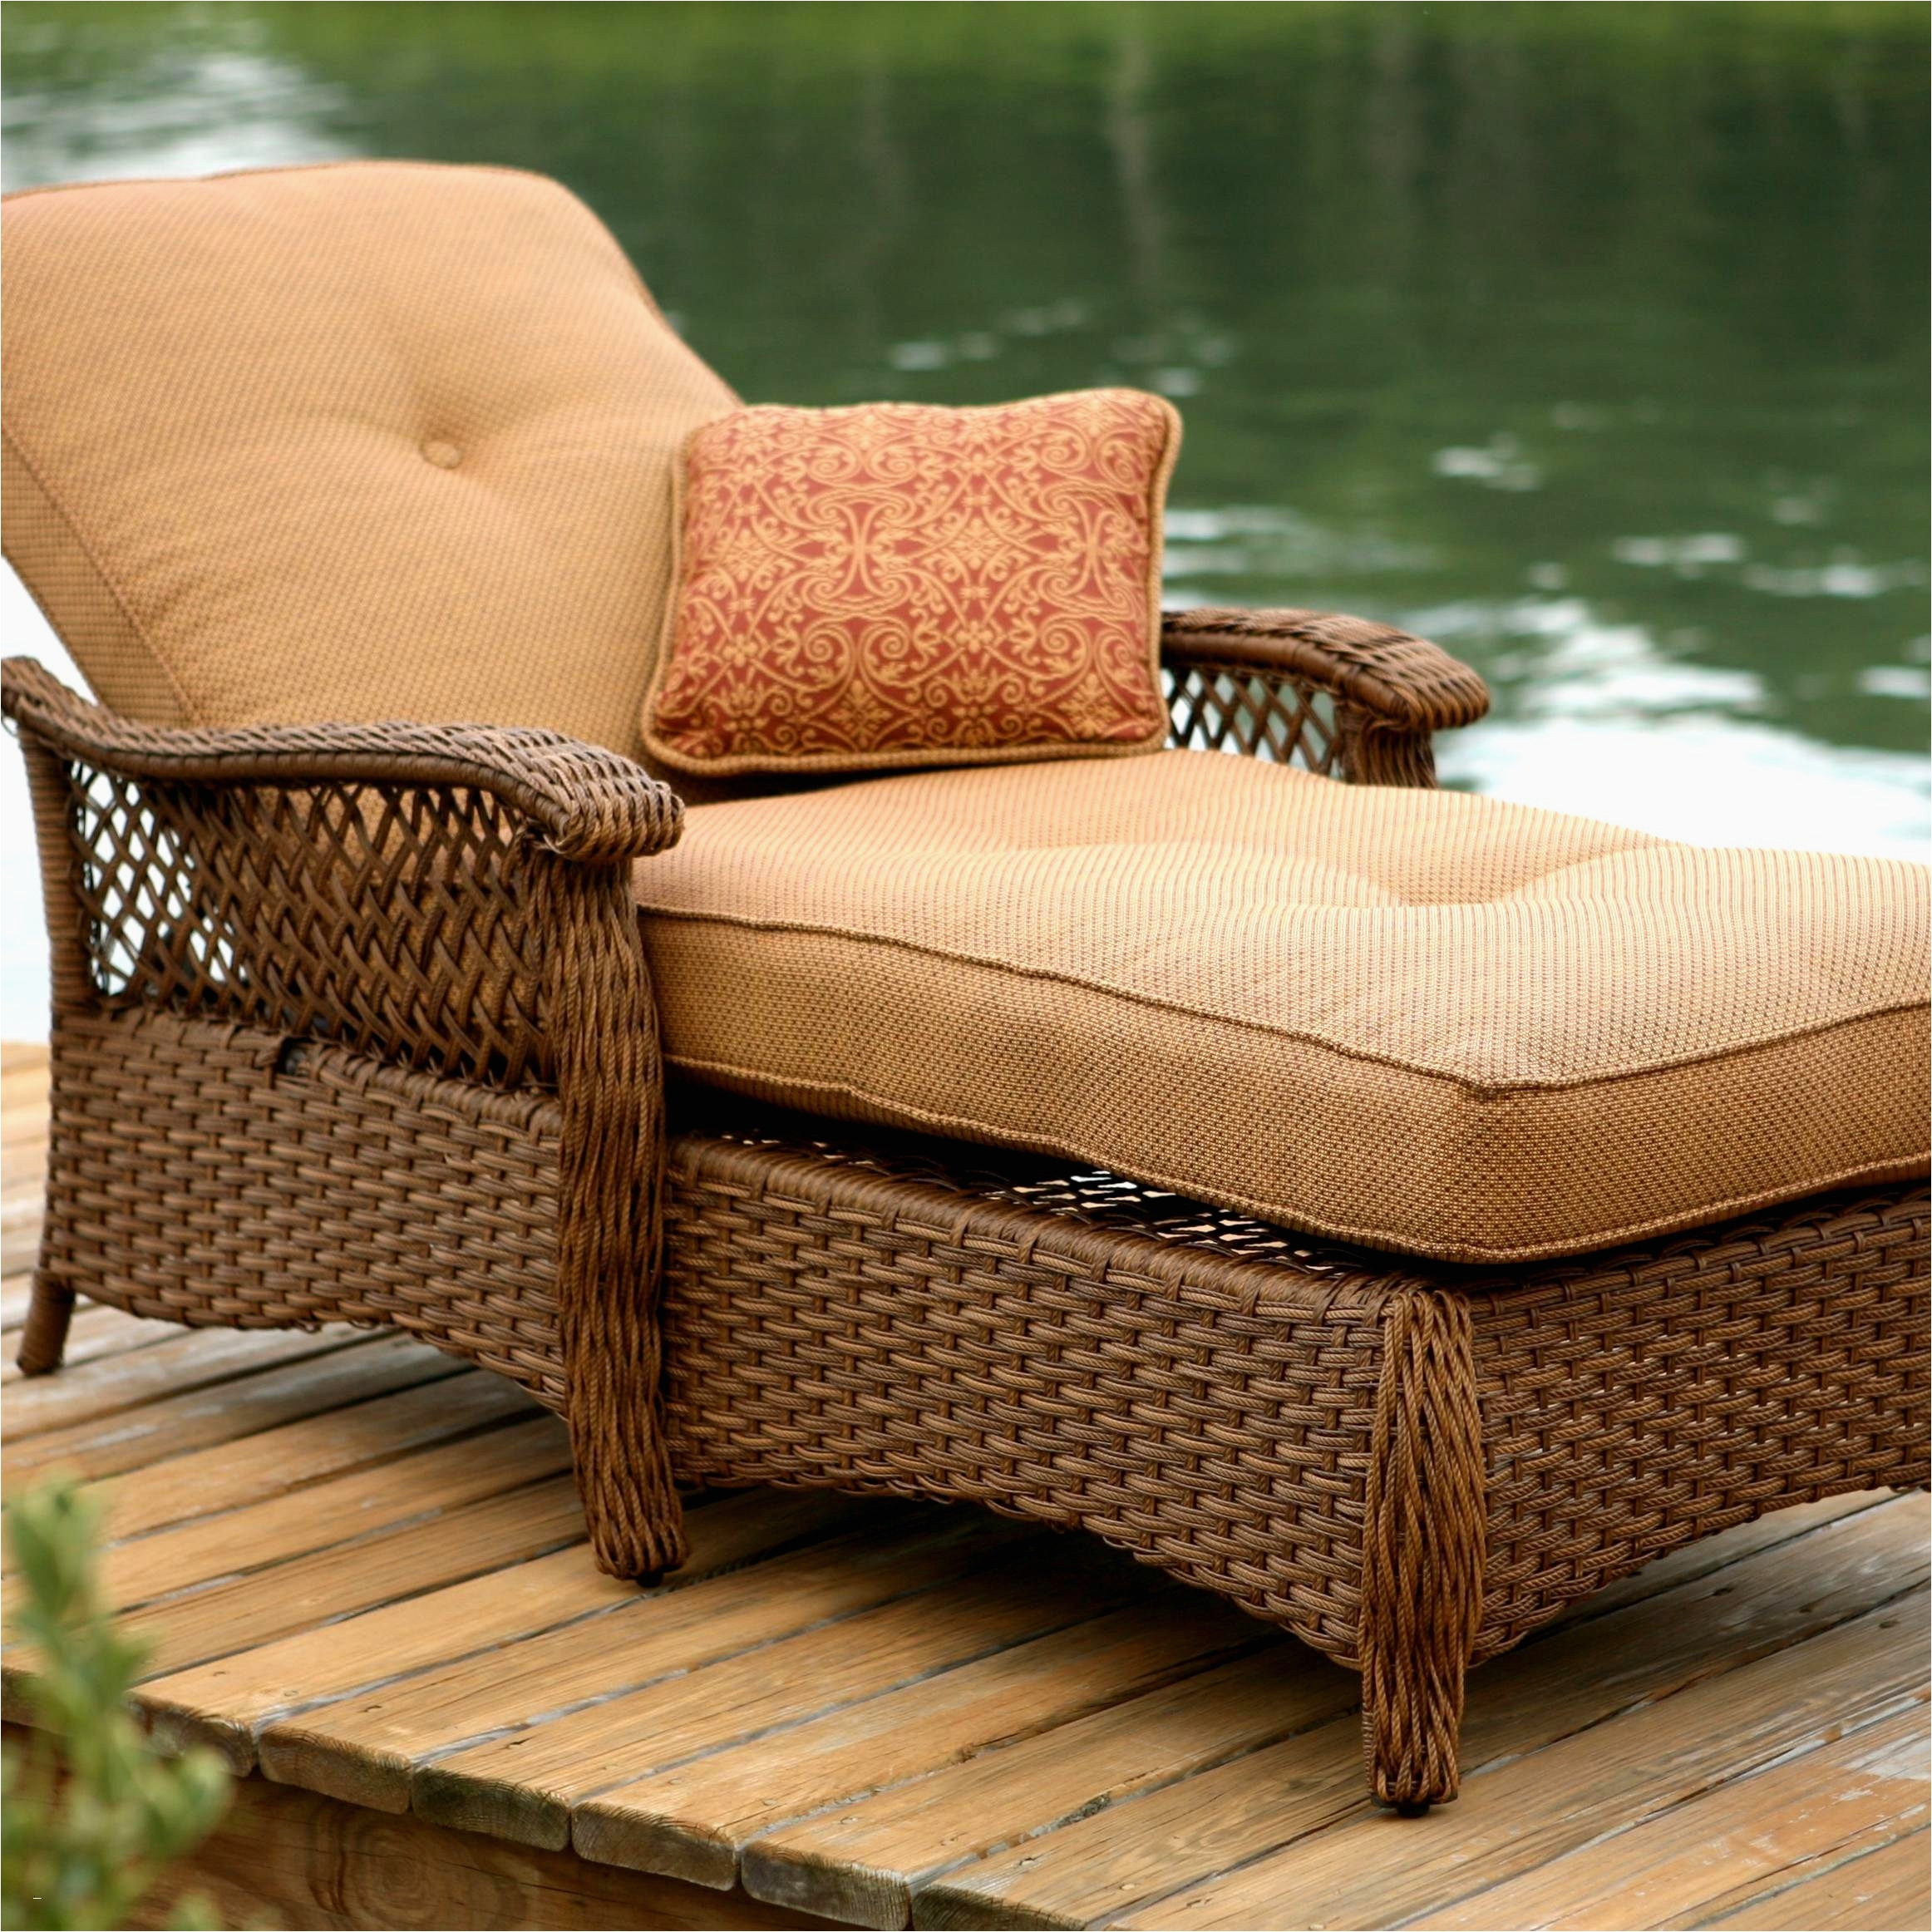 furniture for sale by owner inspirational designer outdoor furniture luxury exciting wicker outdoor sofa 0d collection